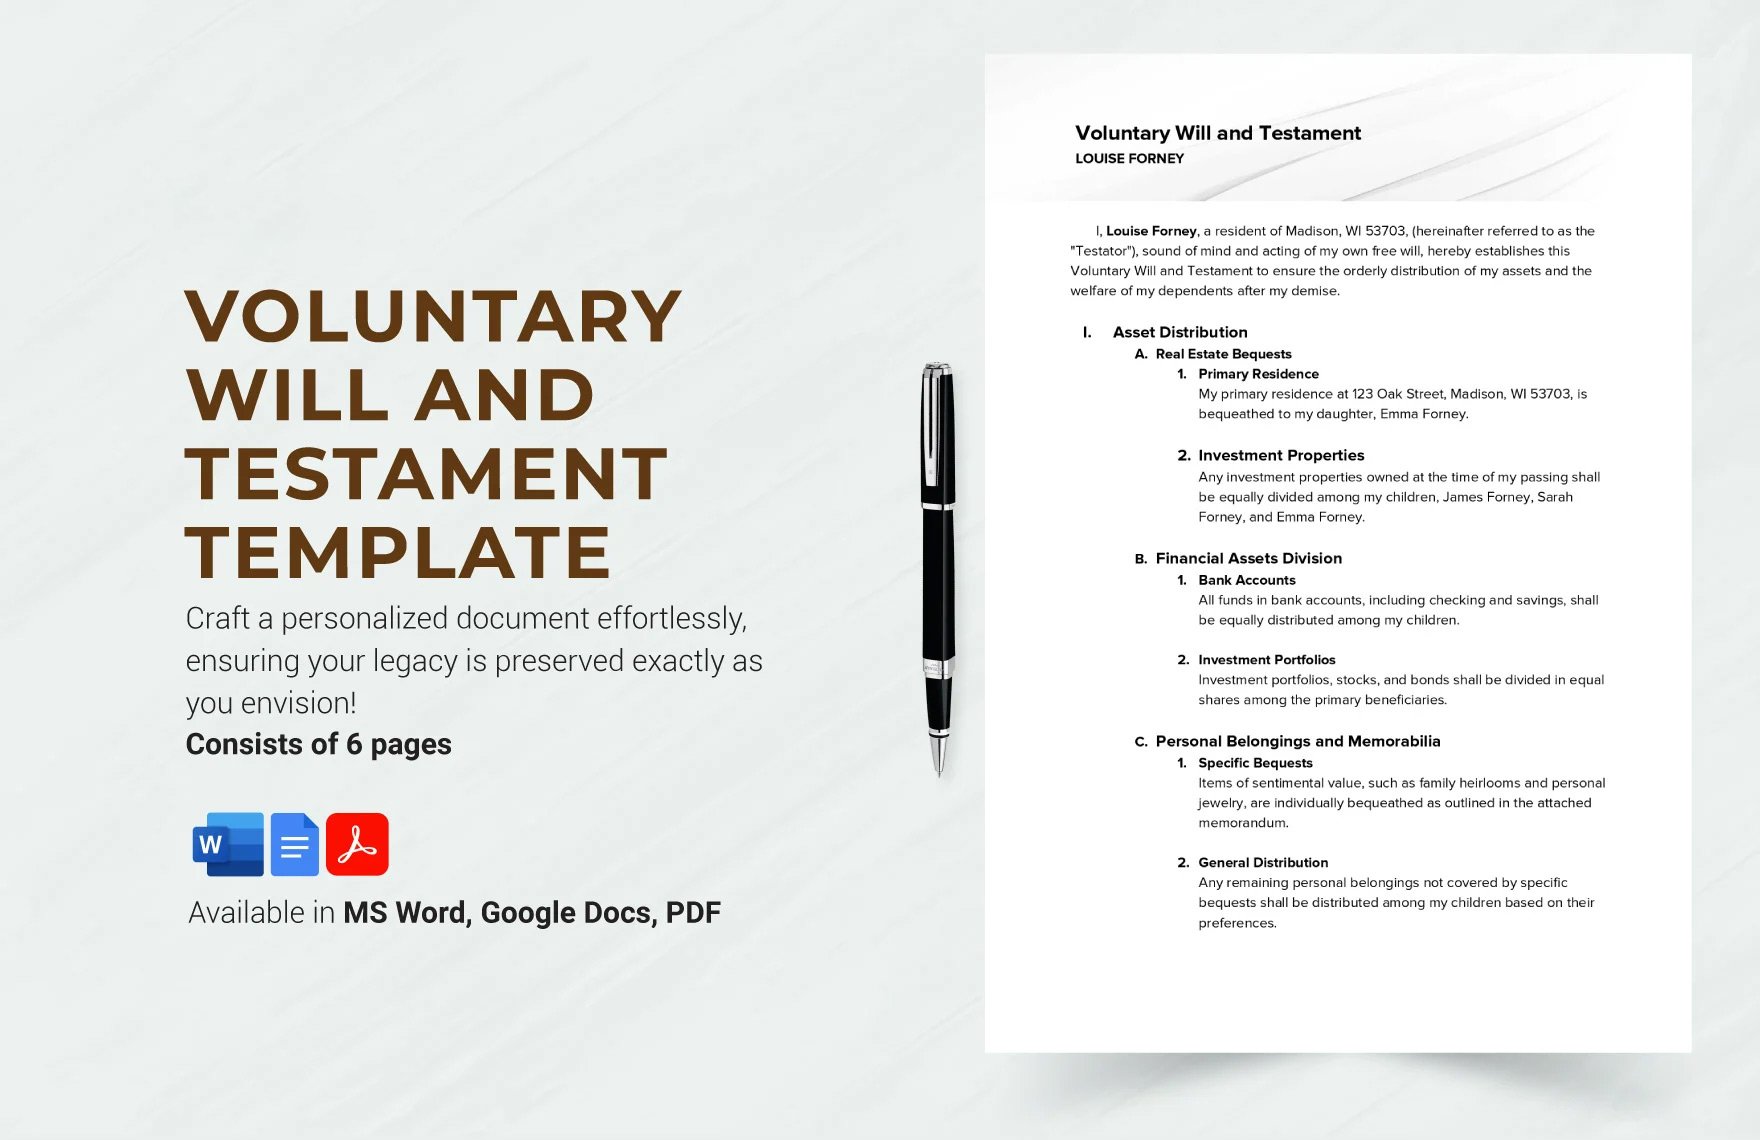 Free Voluntary Will and Testament Template in Word, Google Docs, PDF